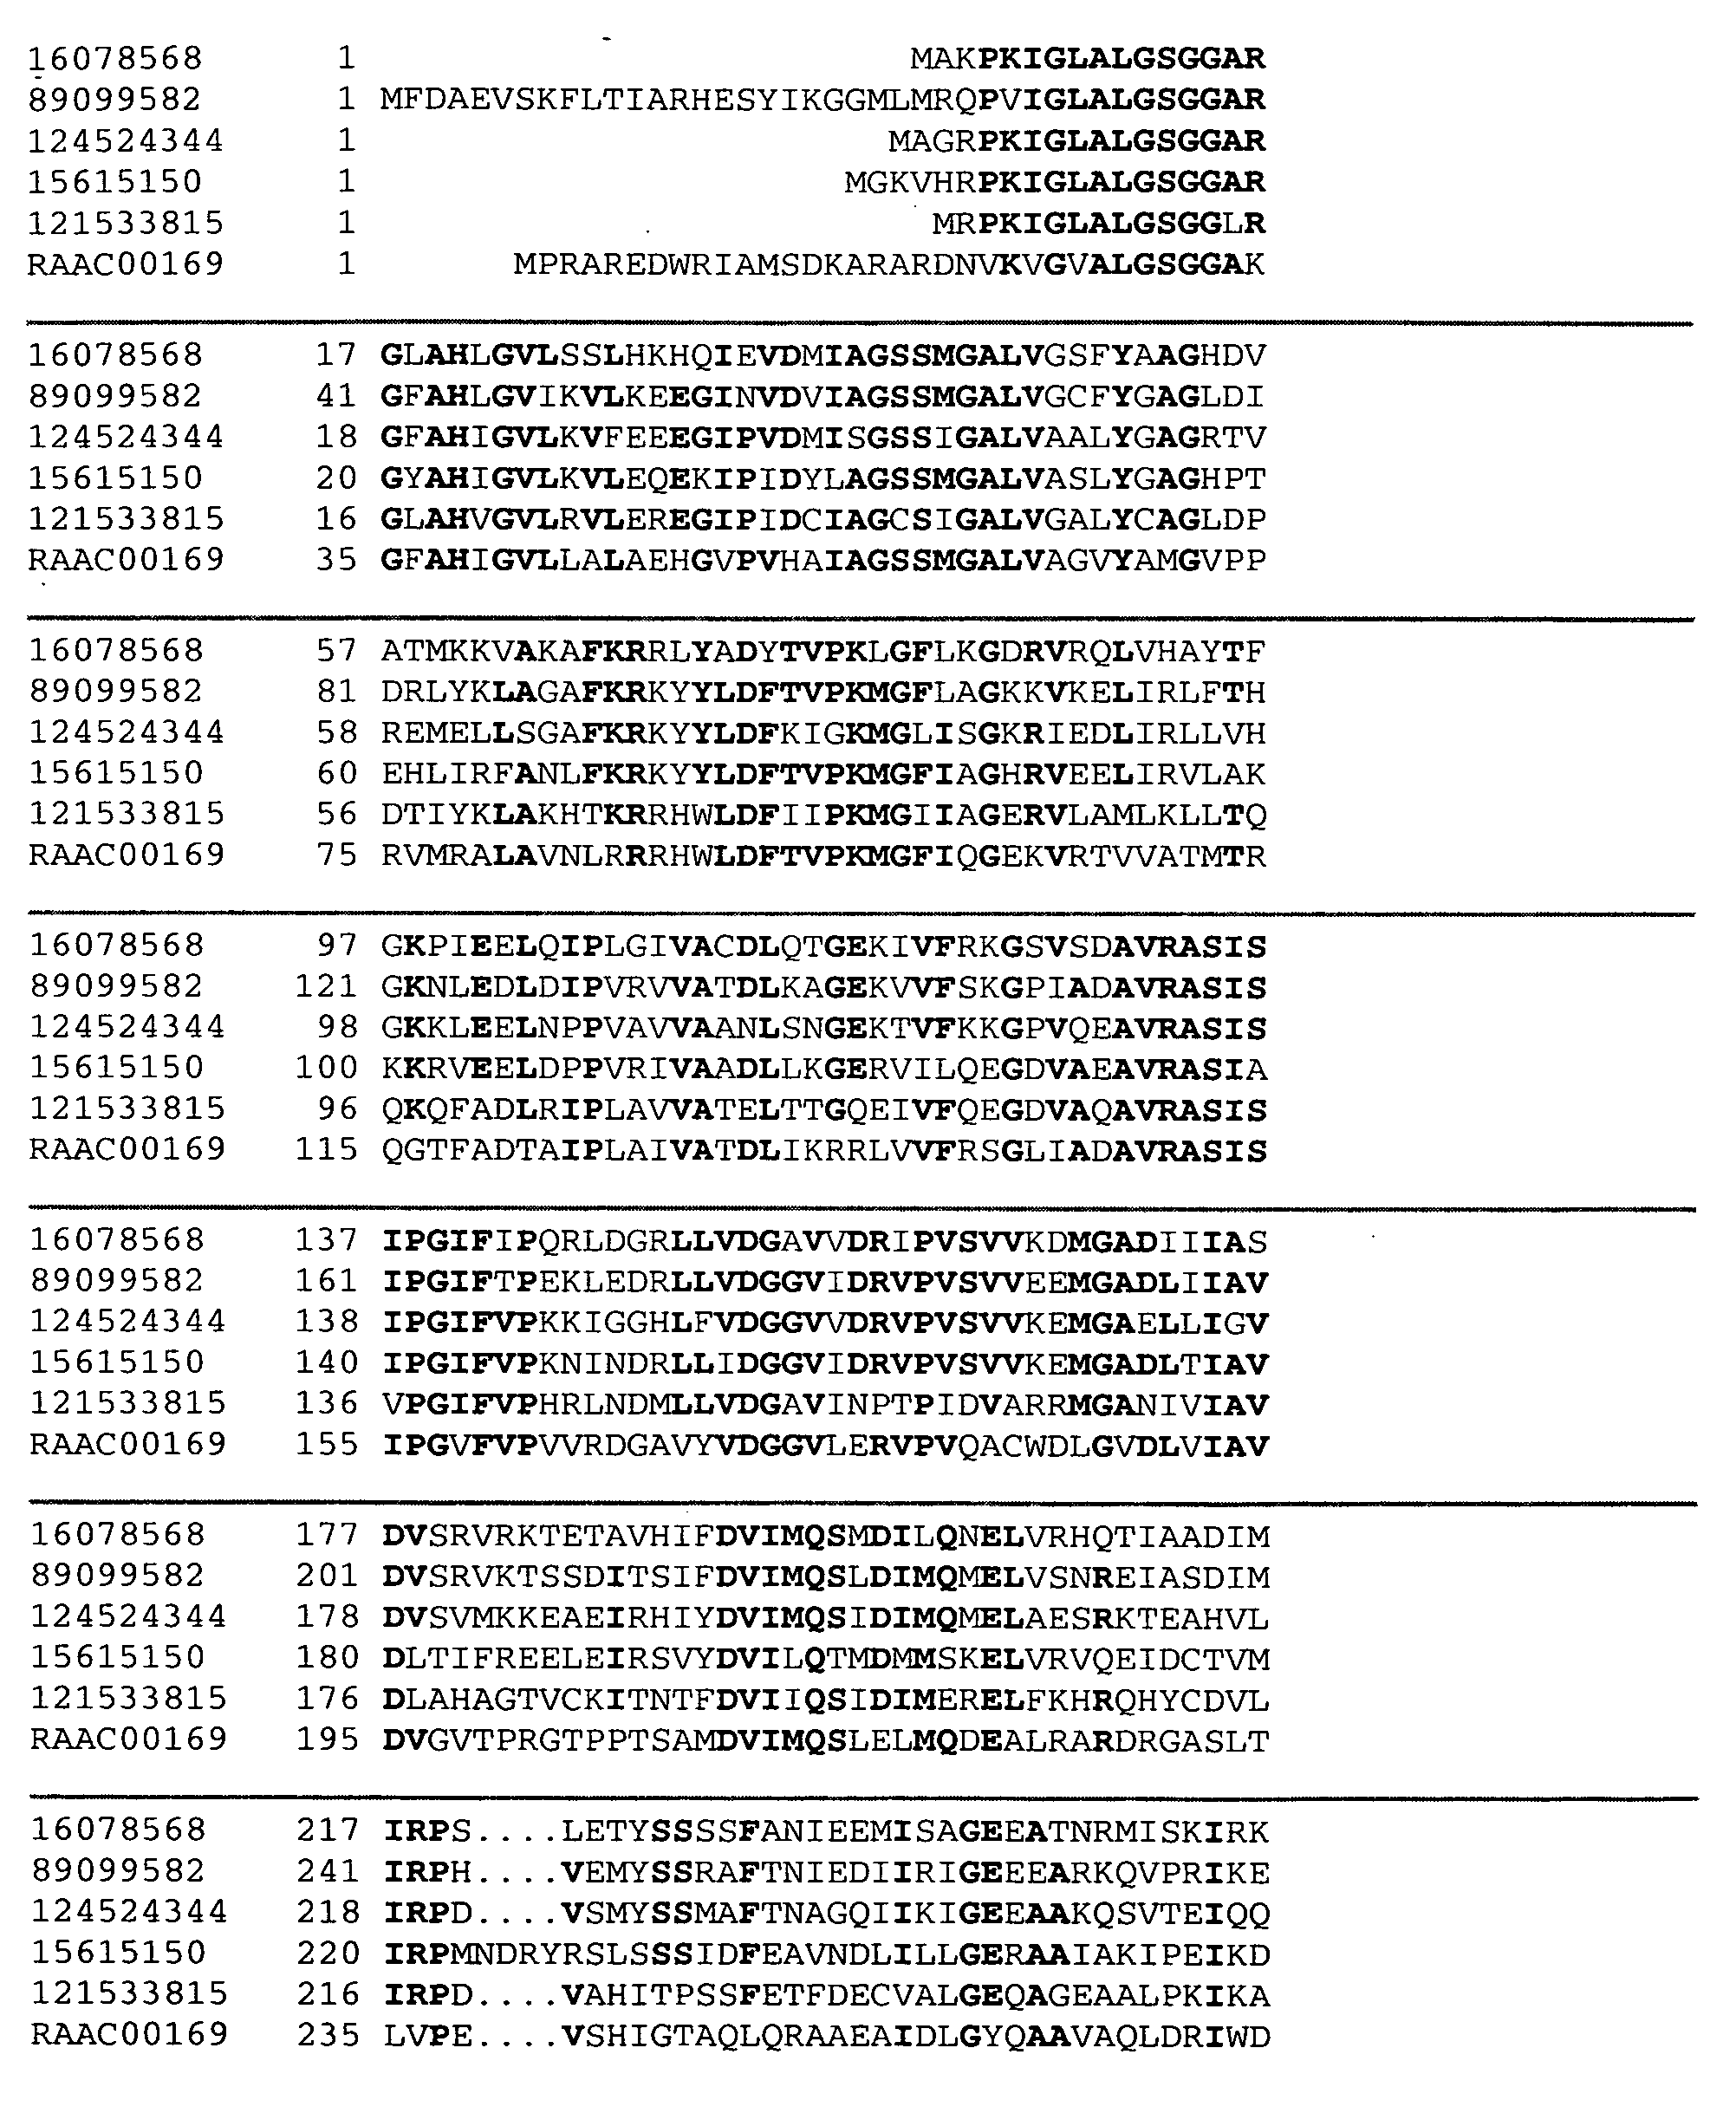 Thermophilic and thermoacidophilic biopolymer-degrading genes and enzymes from alicyclobacillus acidocaldarius and related organisms, methods